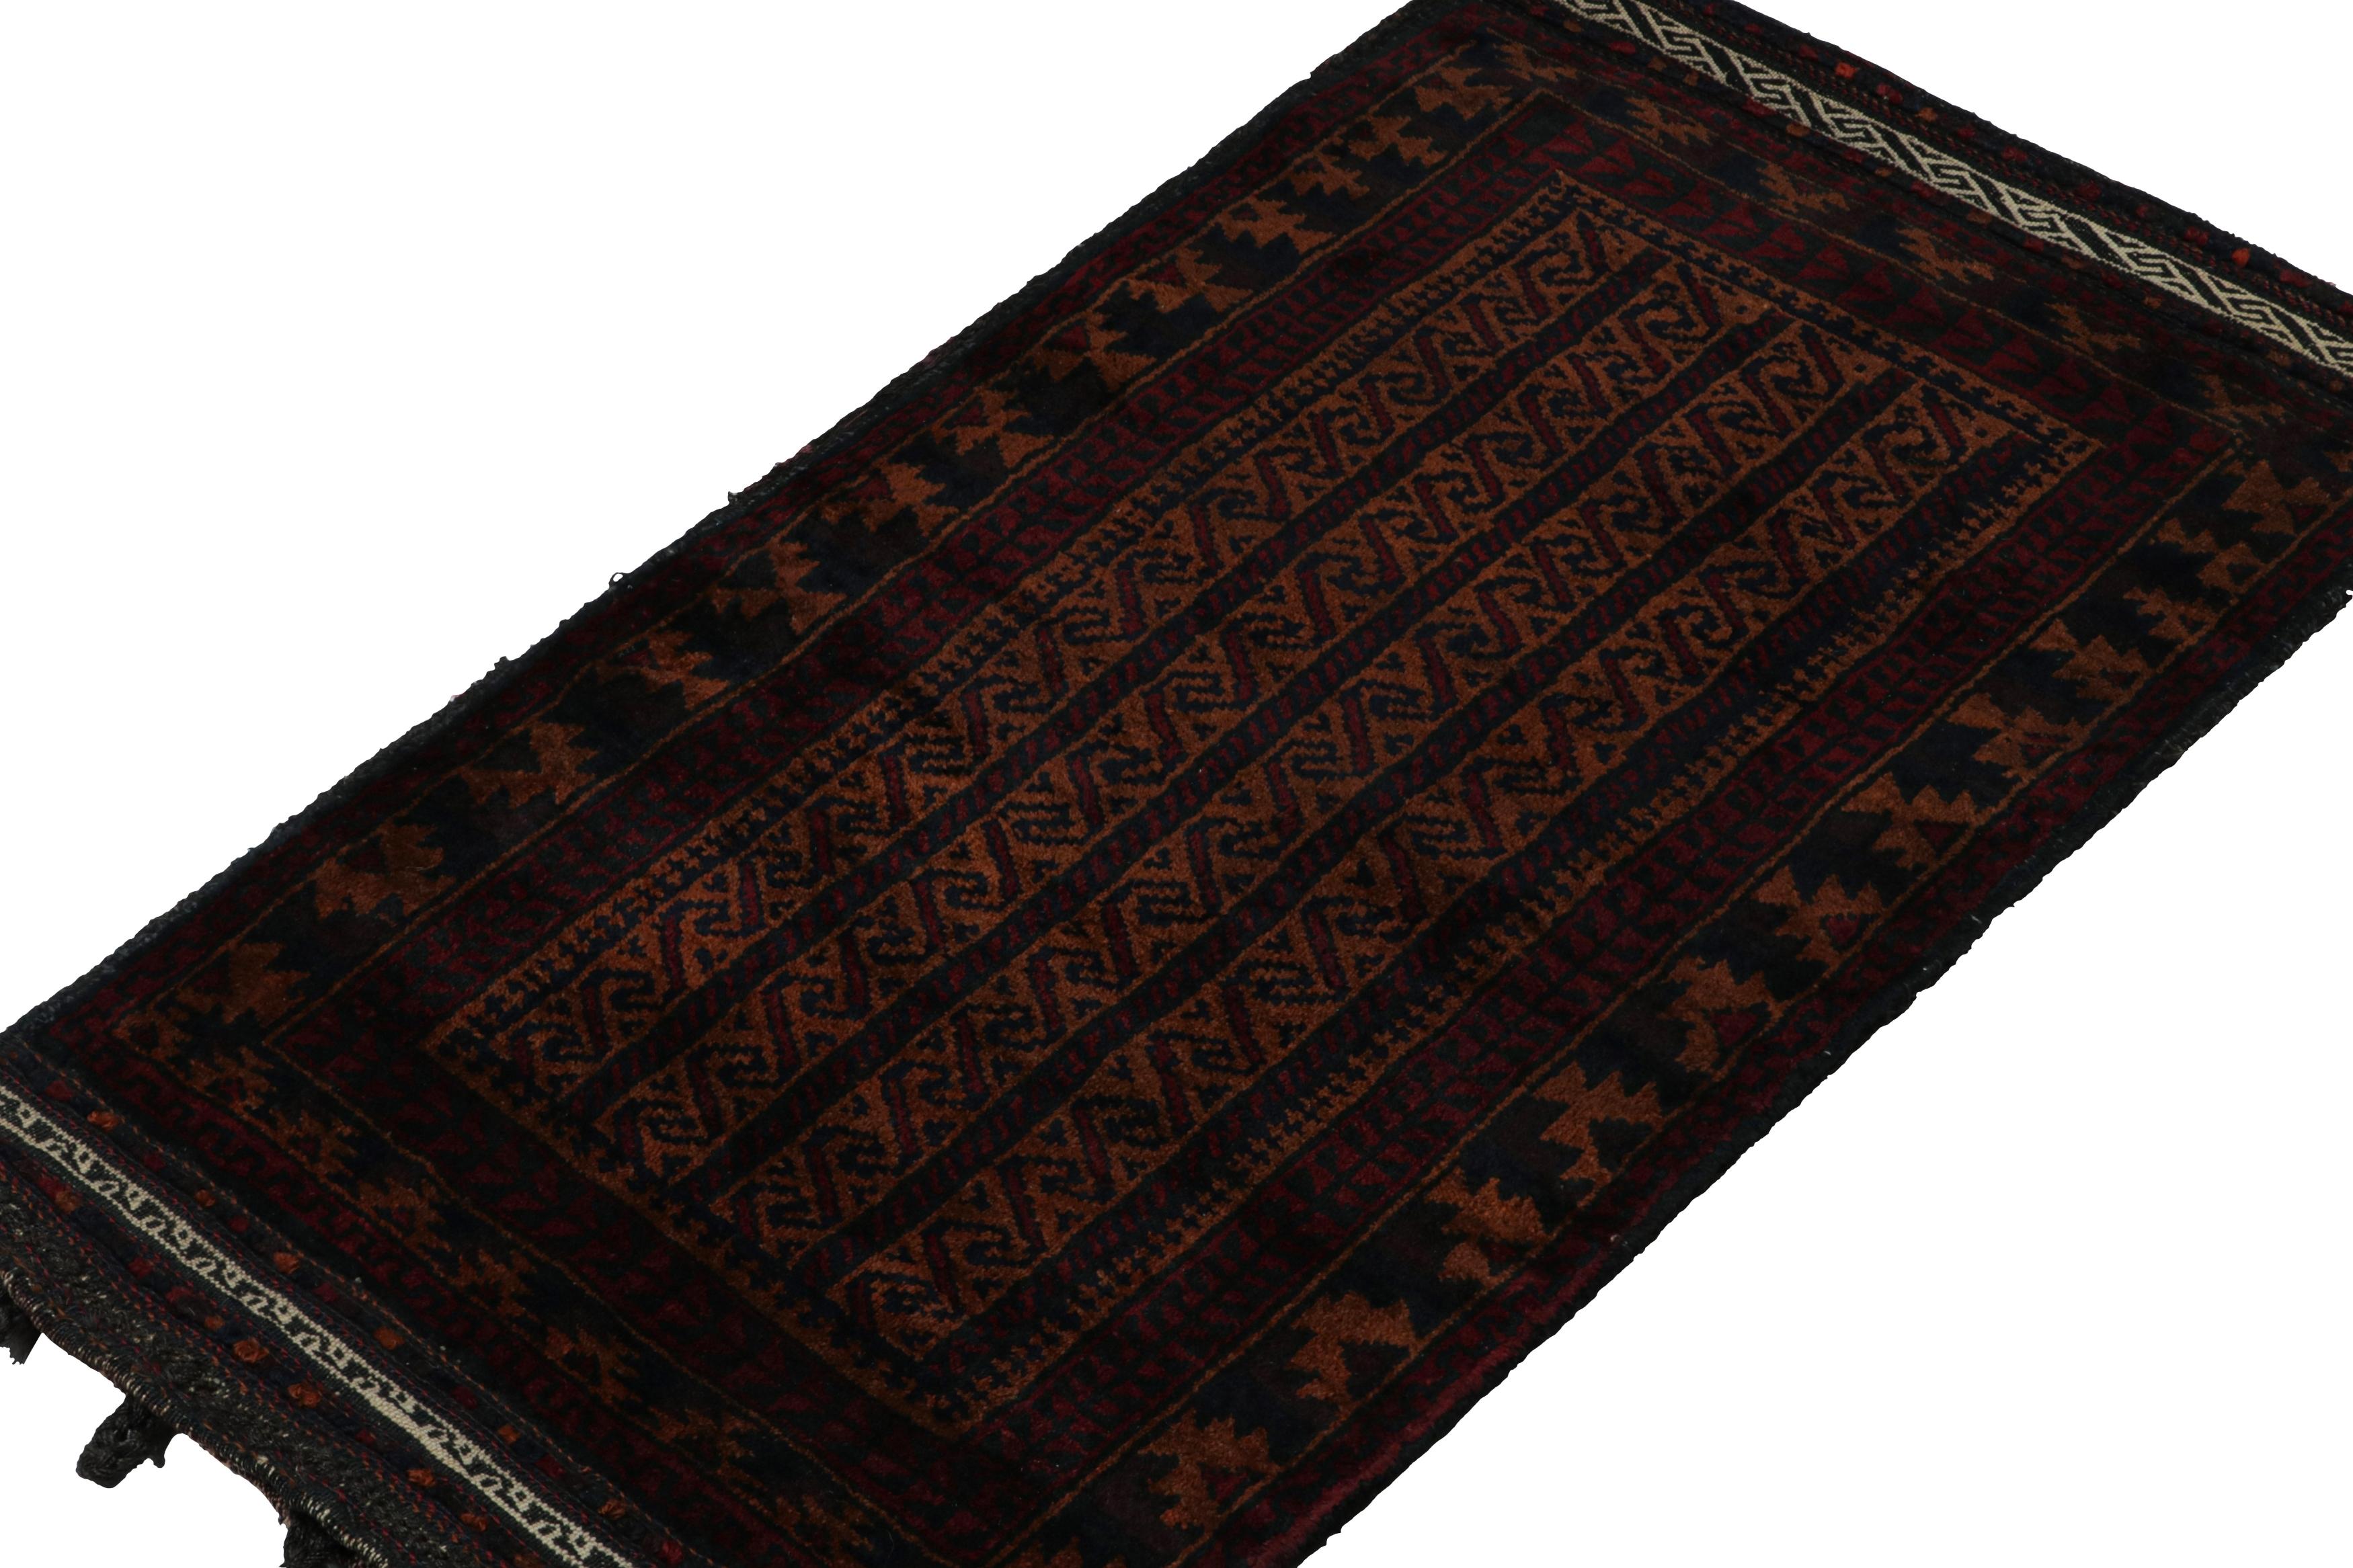 Hand-knotted in wool, this 2x3 Baluch Persian rug of the 1950s is the latest to enter Rug & Kilim’s Antique & Vintage collection.

On the Design:

The vintage rug carries tribal patterns in rich tones of red, blue & brown. The field is encased in